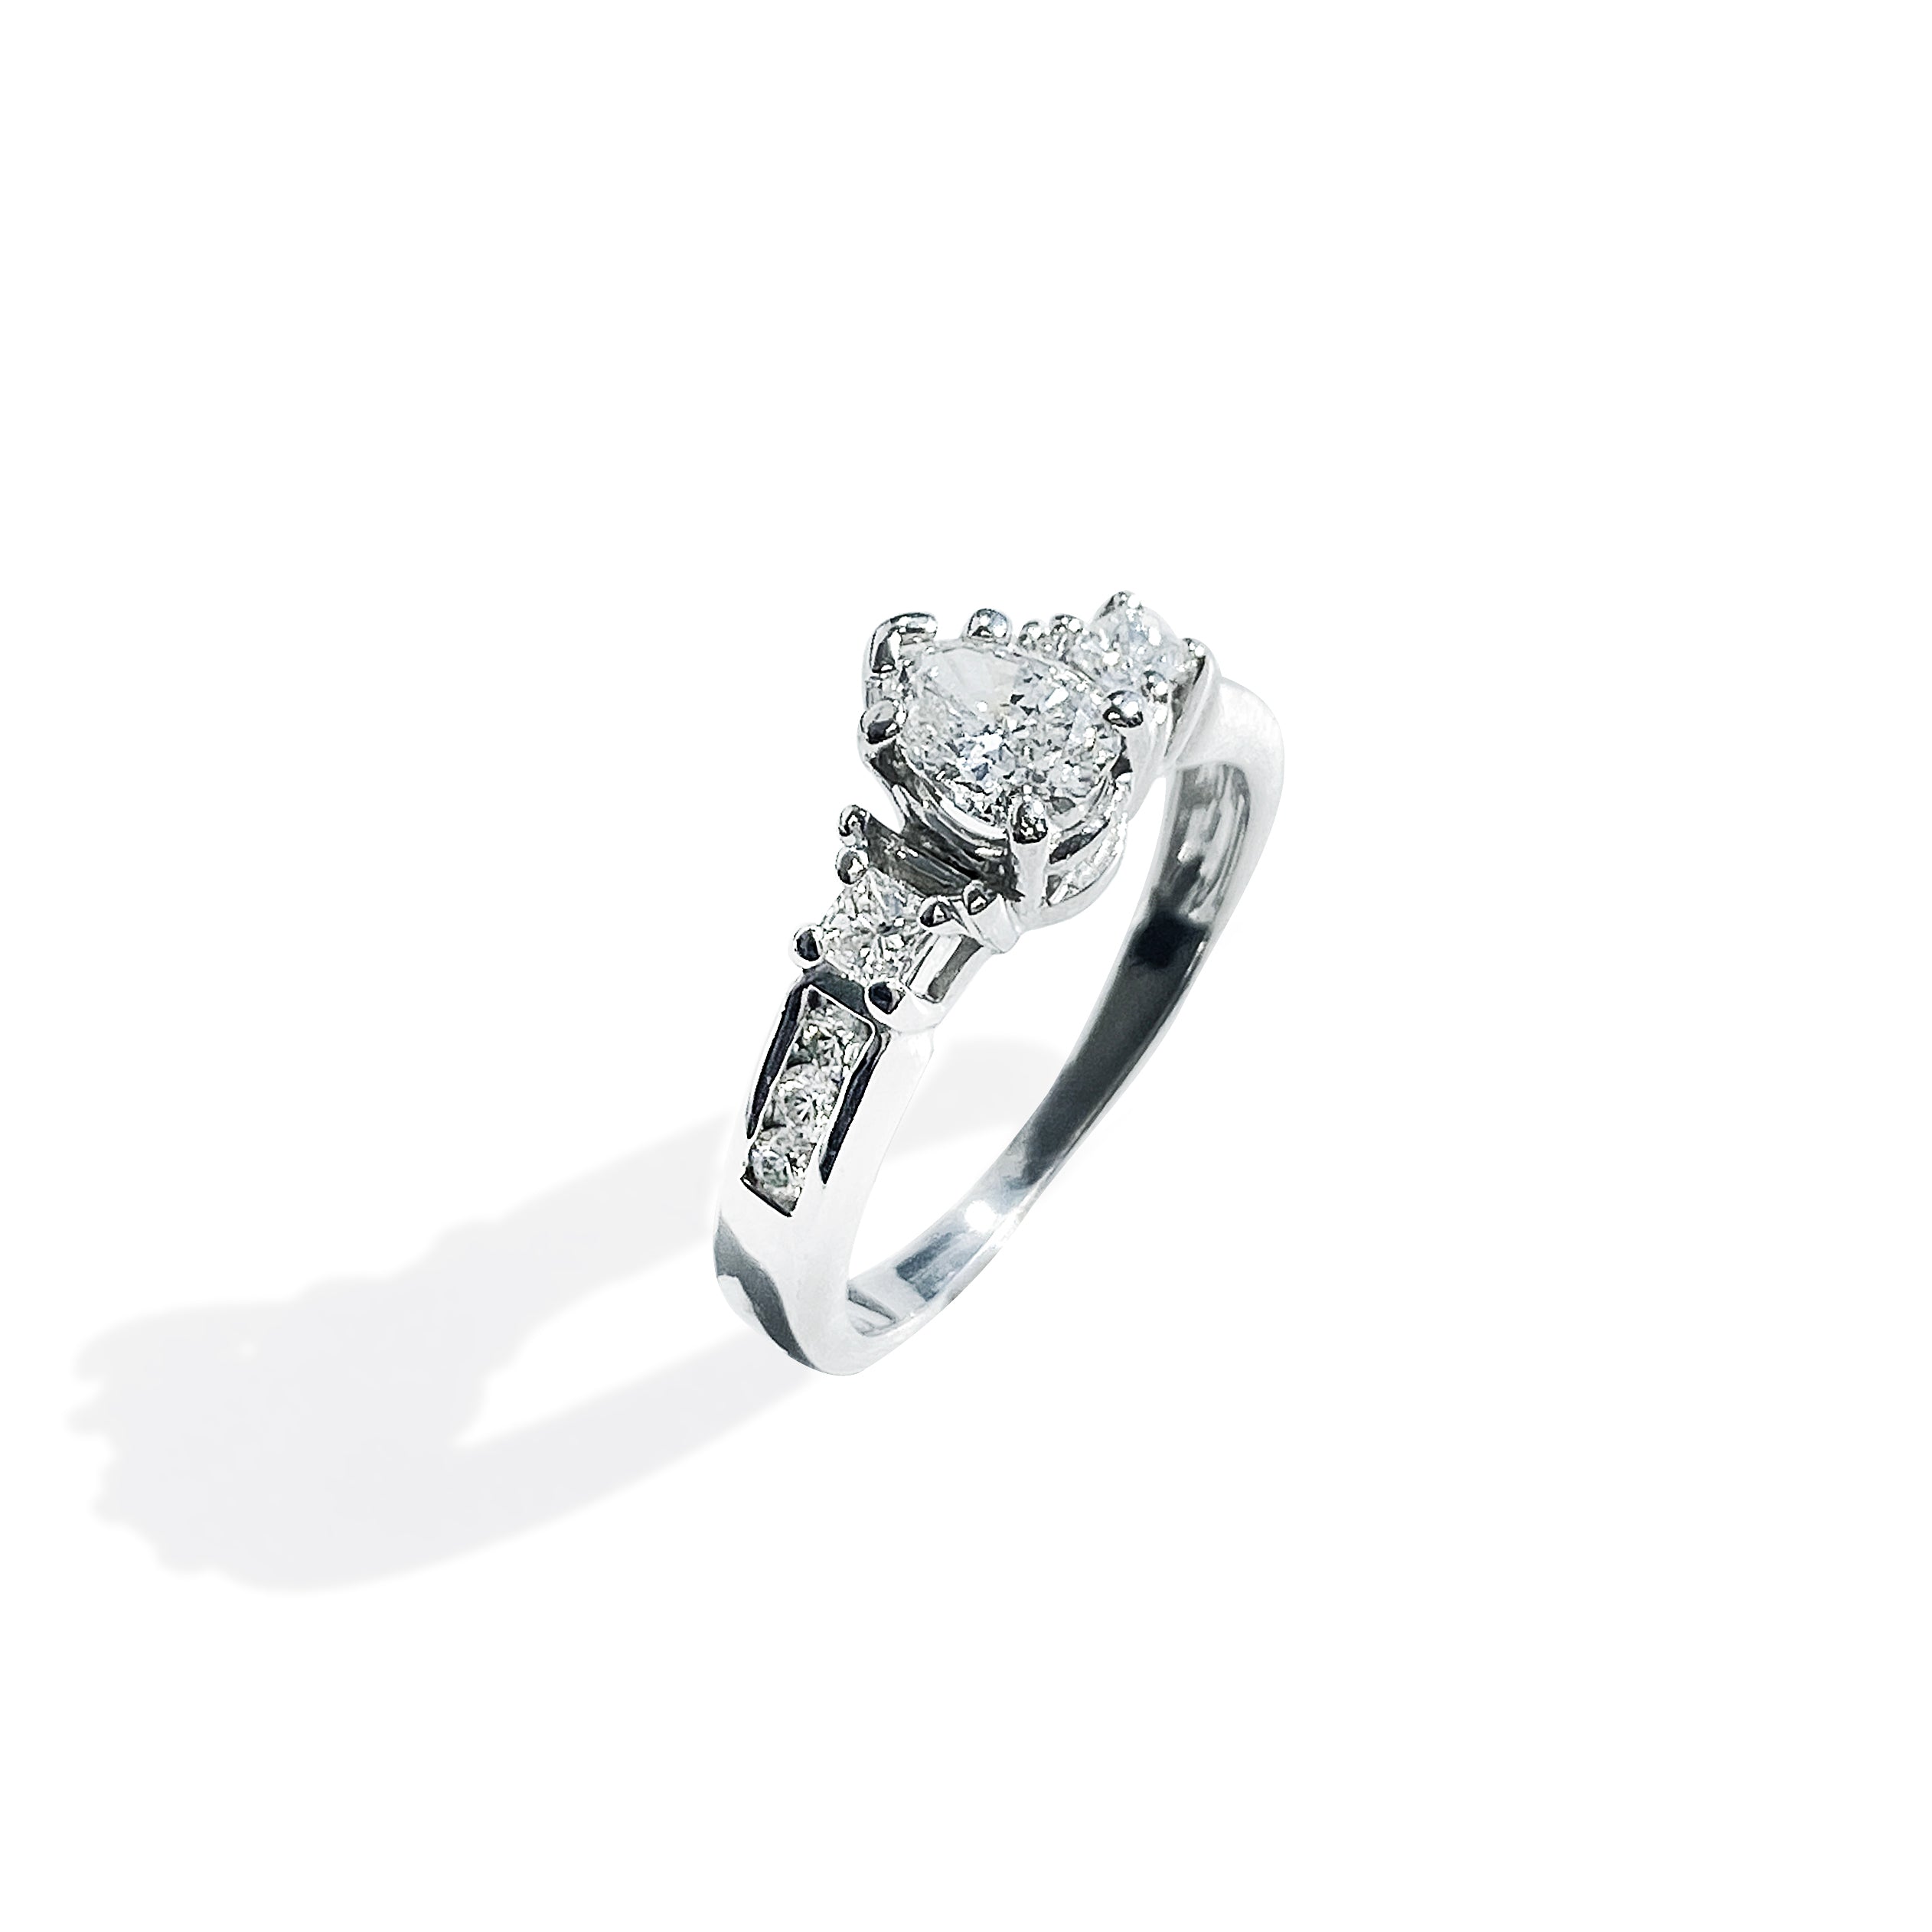 Pear-Shape Diamond Ring with side stones